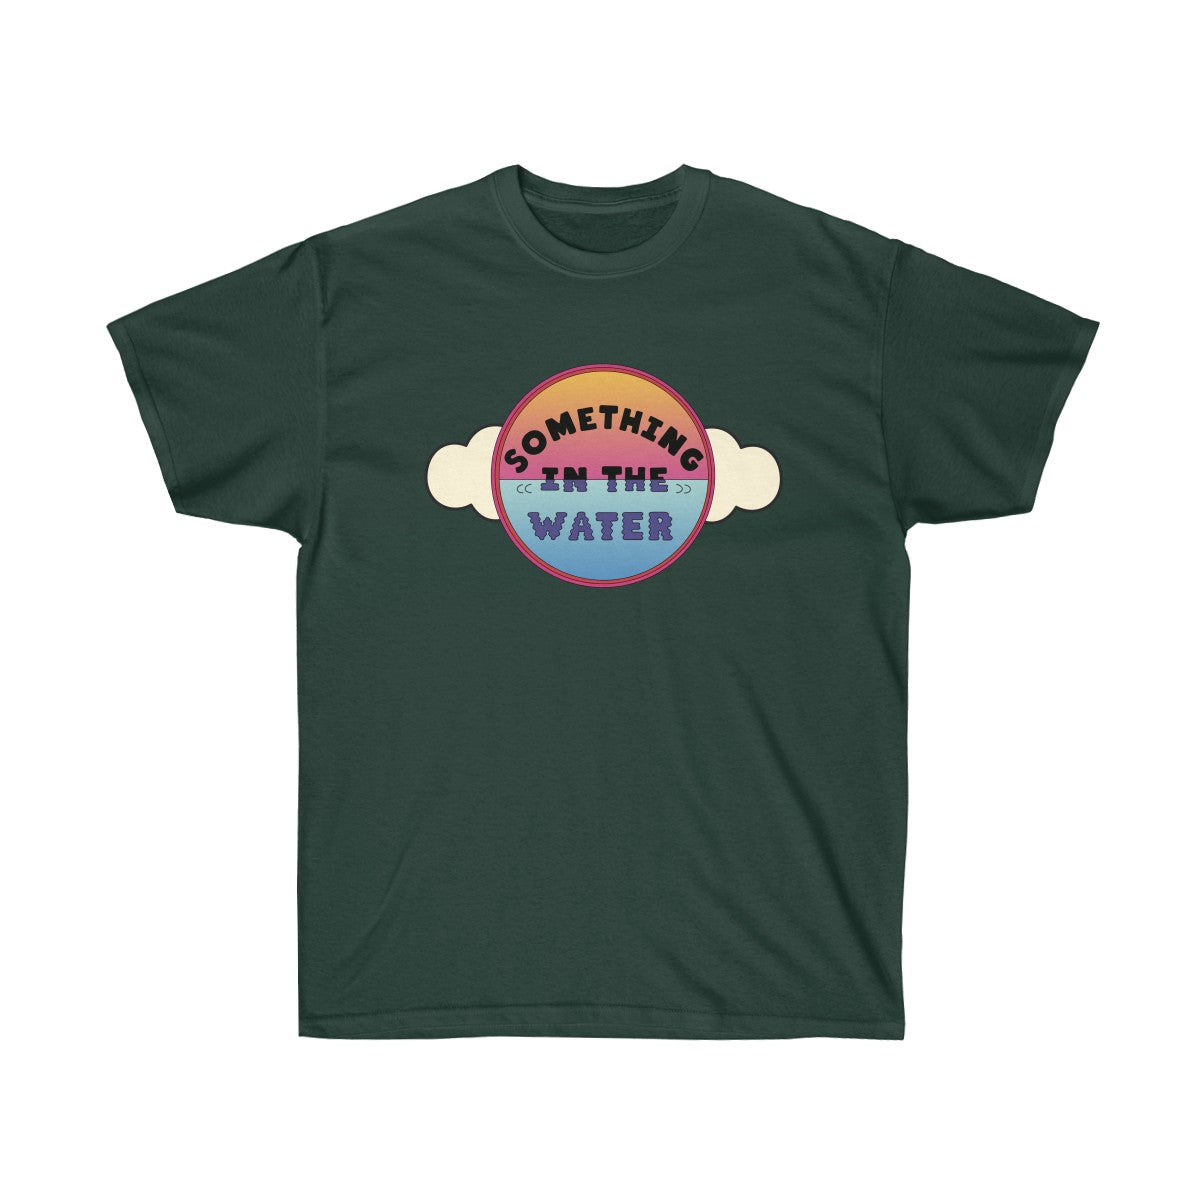 Something in the water Unisex Ultra Cotton Tee - Pharrell Williams festival inspired-Forest Green-S-Archethype